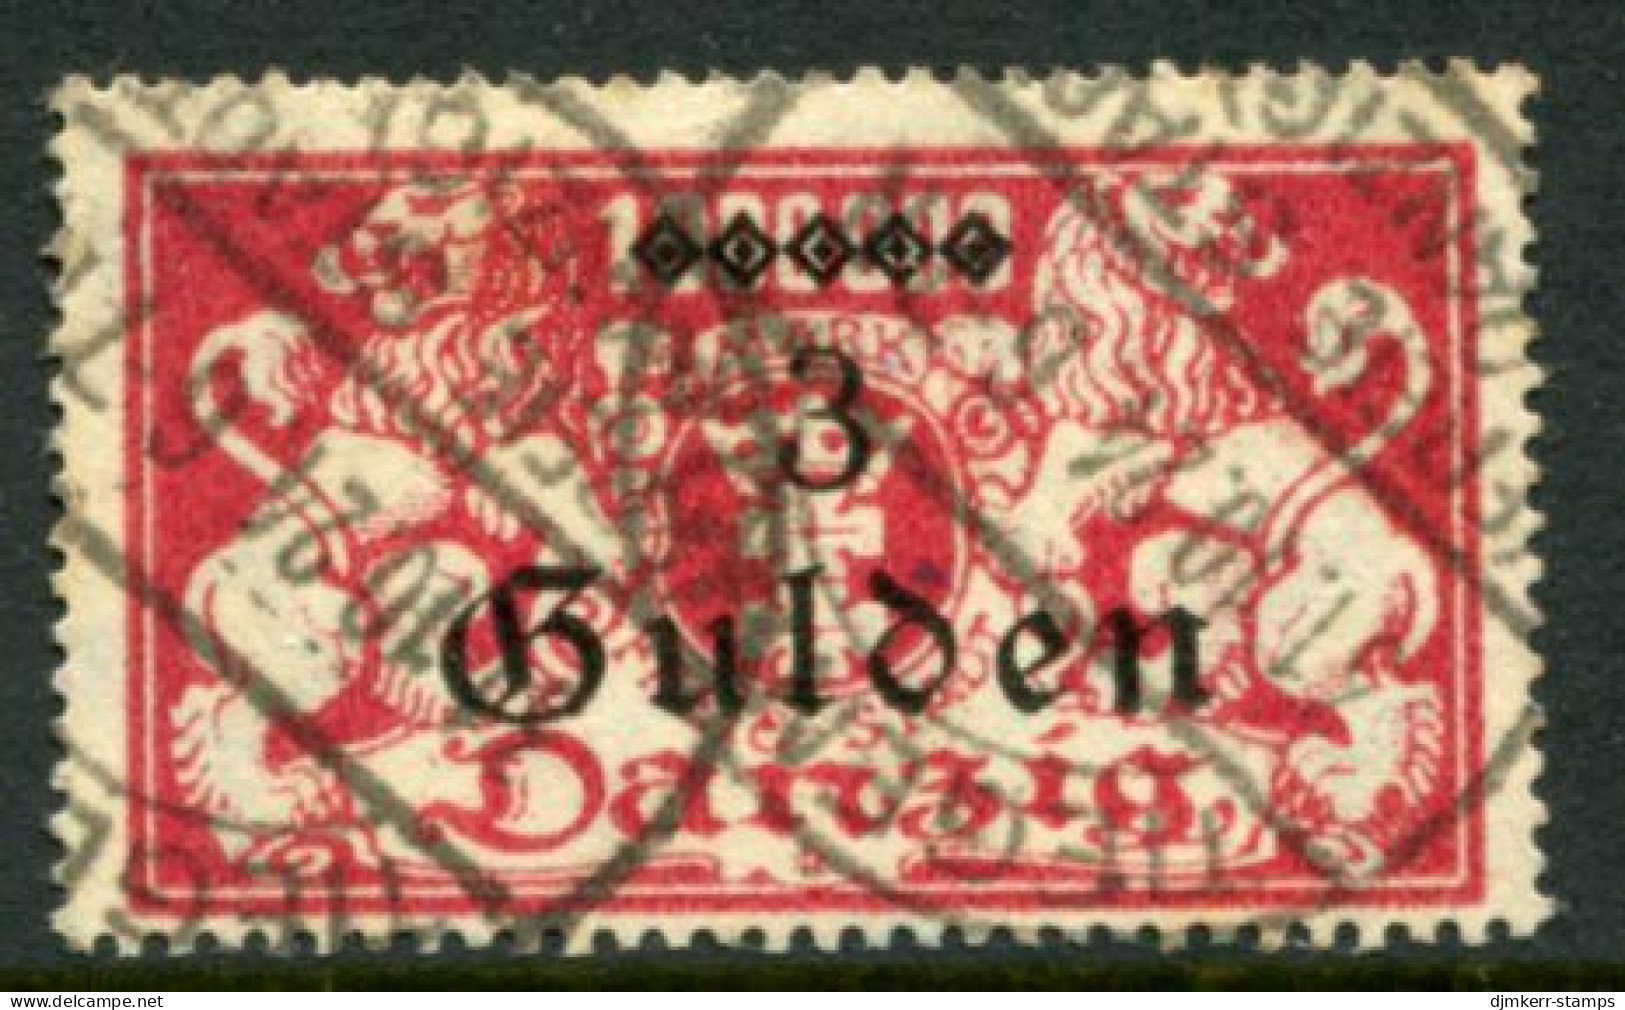 DANZIG 1923 Arms Definitive 3 G. On 1 Mio. Mk. Postally Used With Tiegenhof Postmark.  Michel 191 - Used